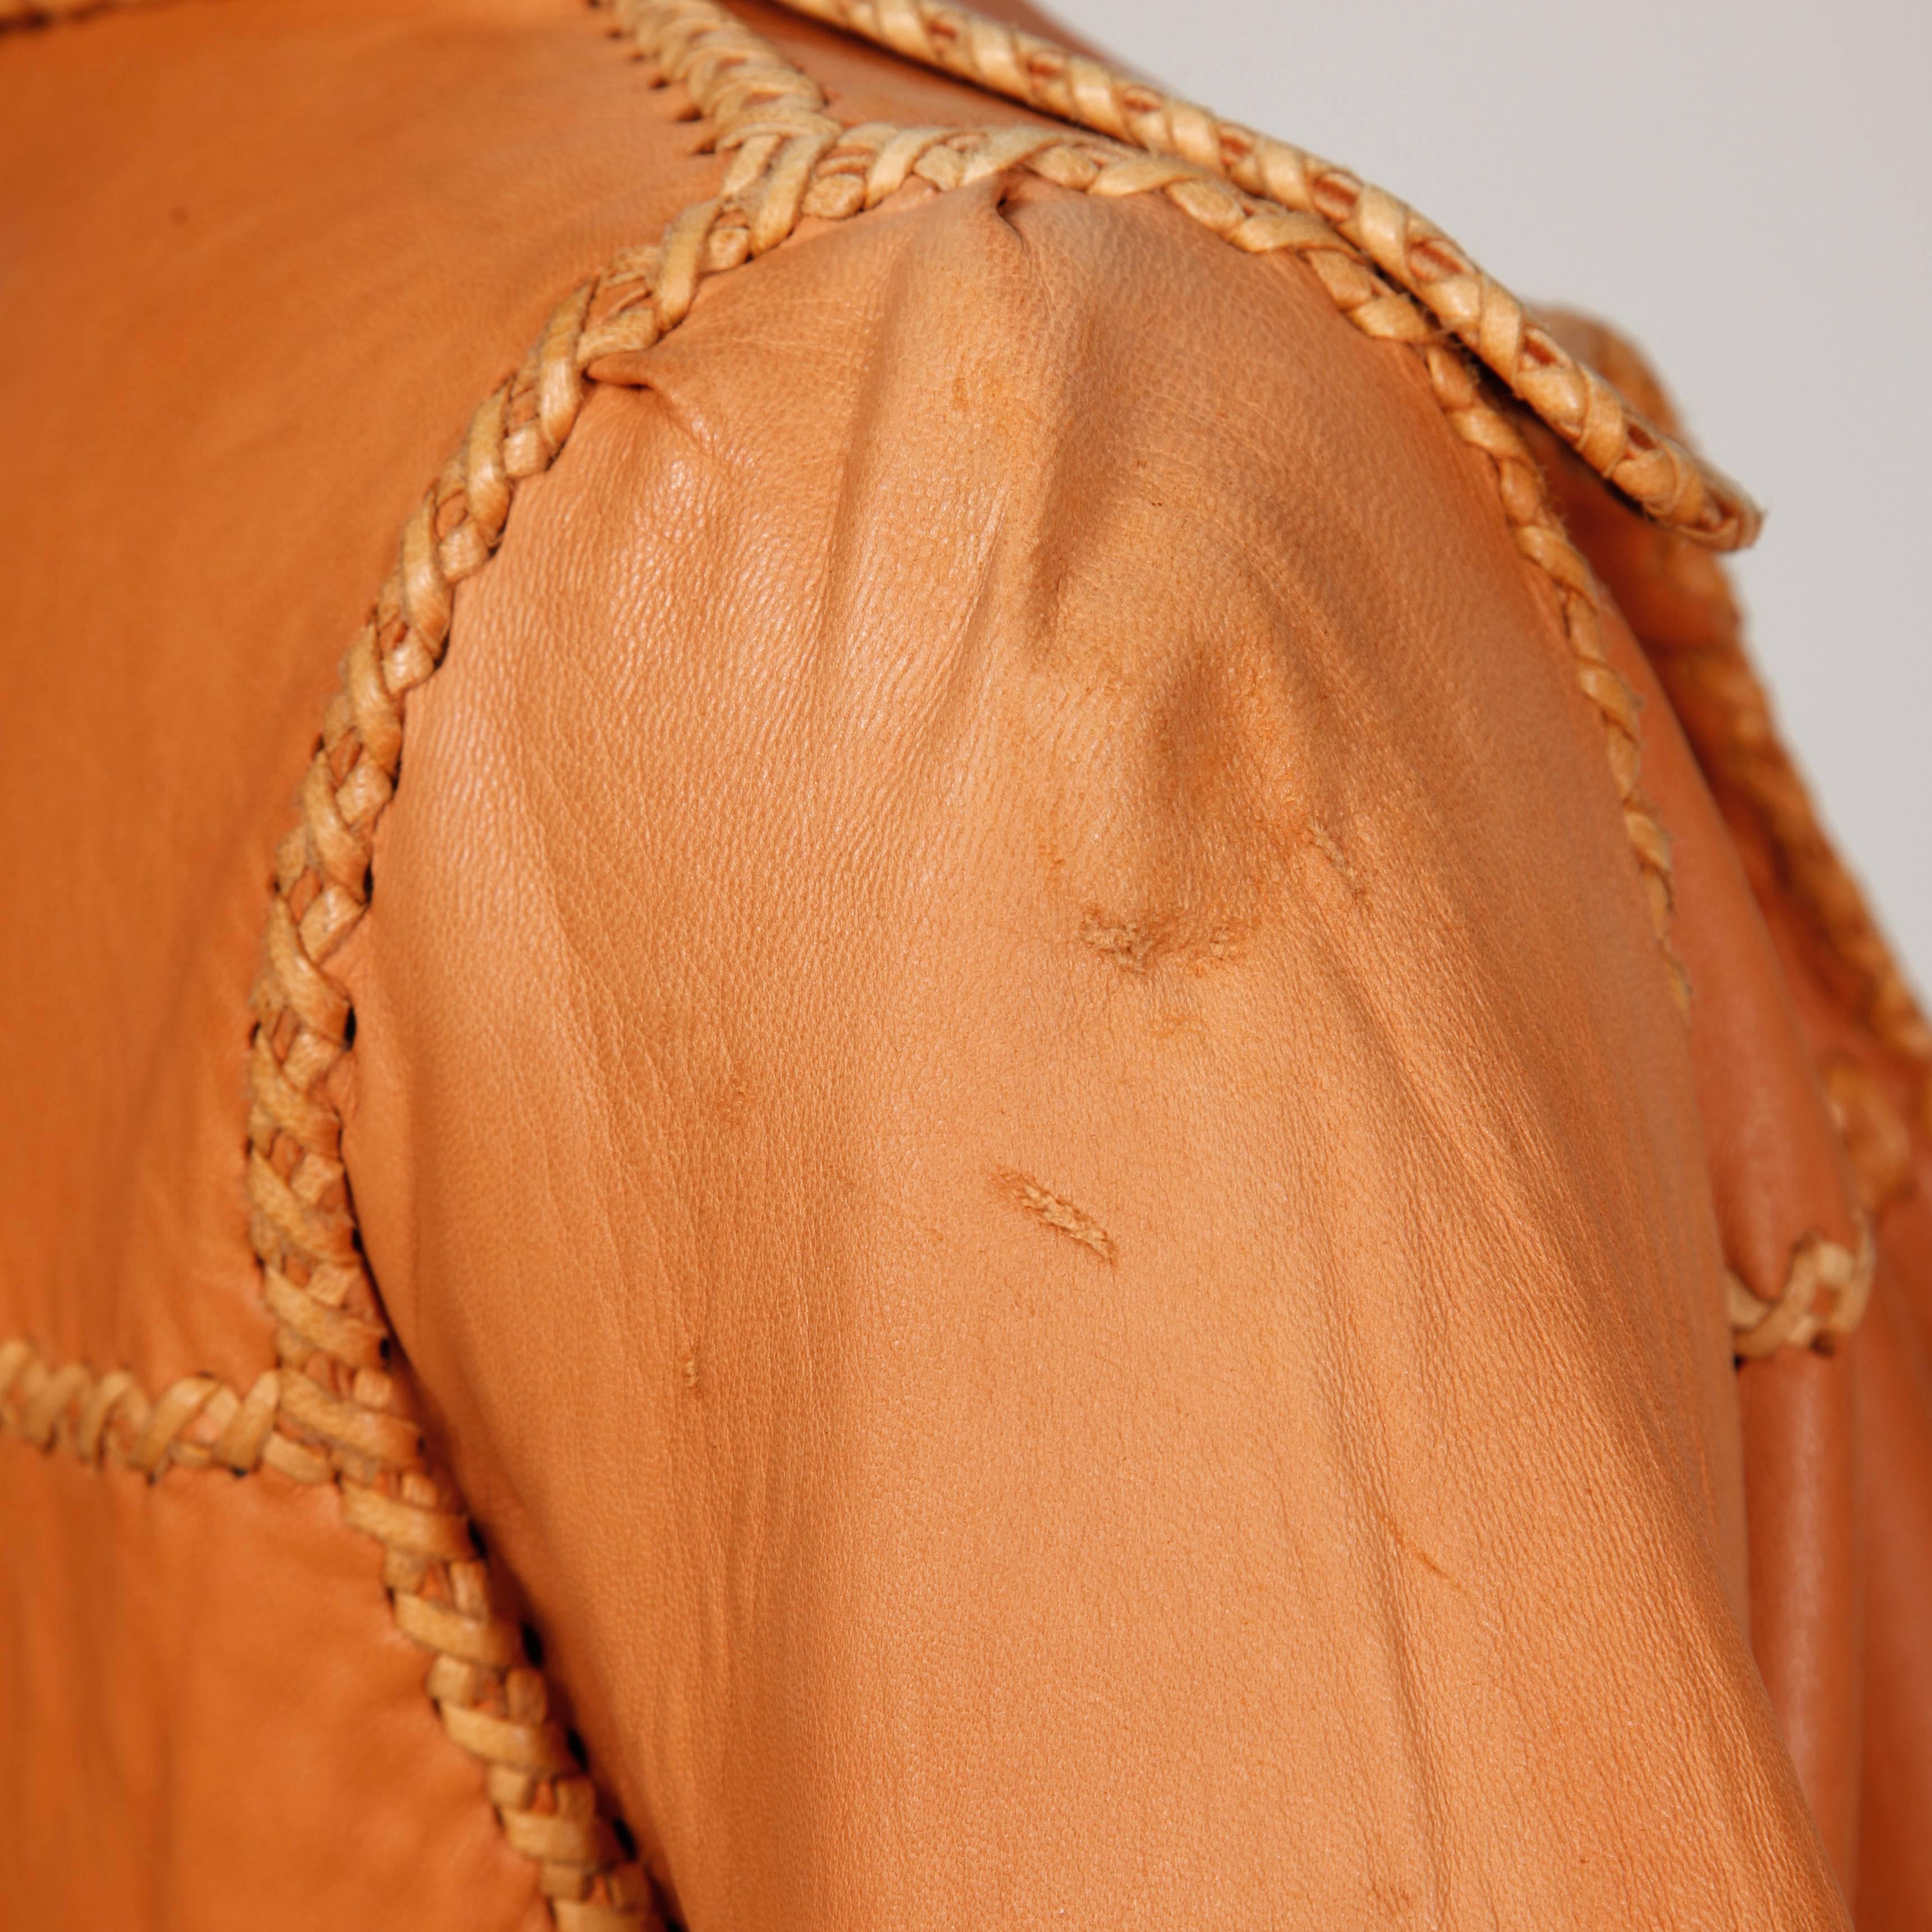 1970s Pieles Pitic North Beach Leather Vintage Handmade Whipstitch Coat 1